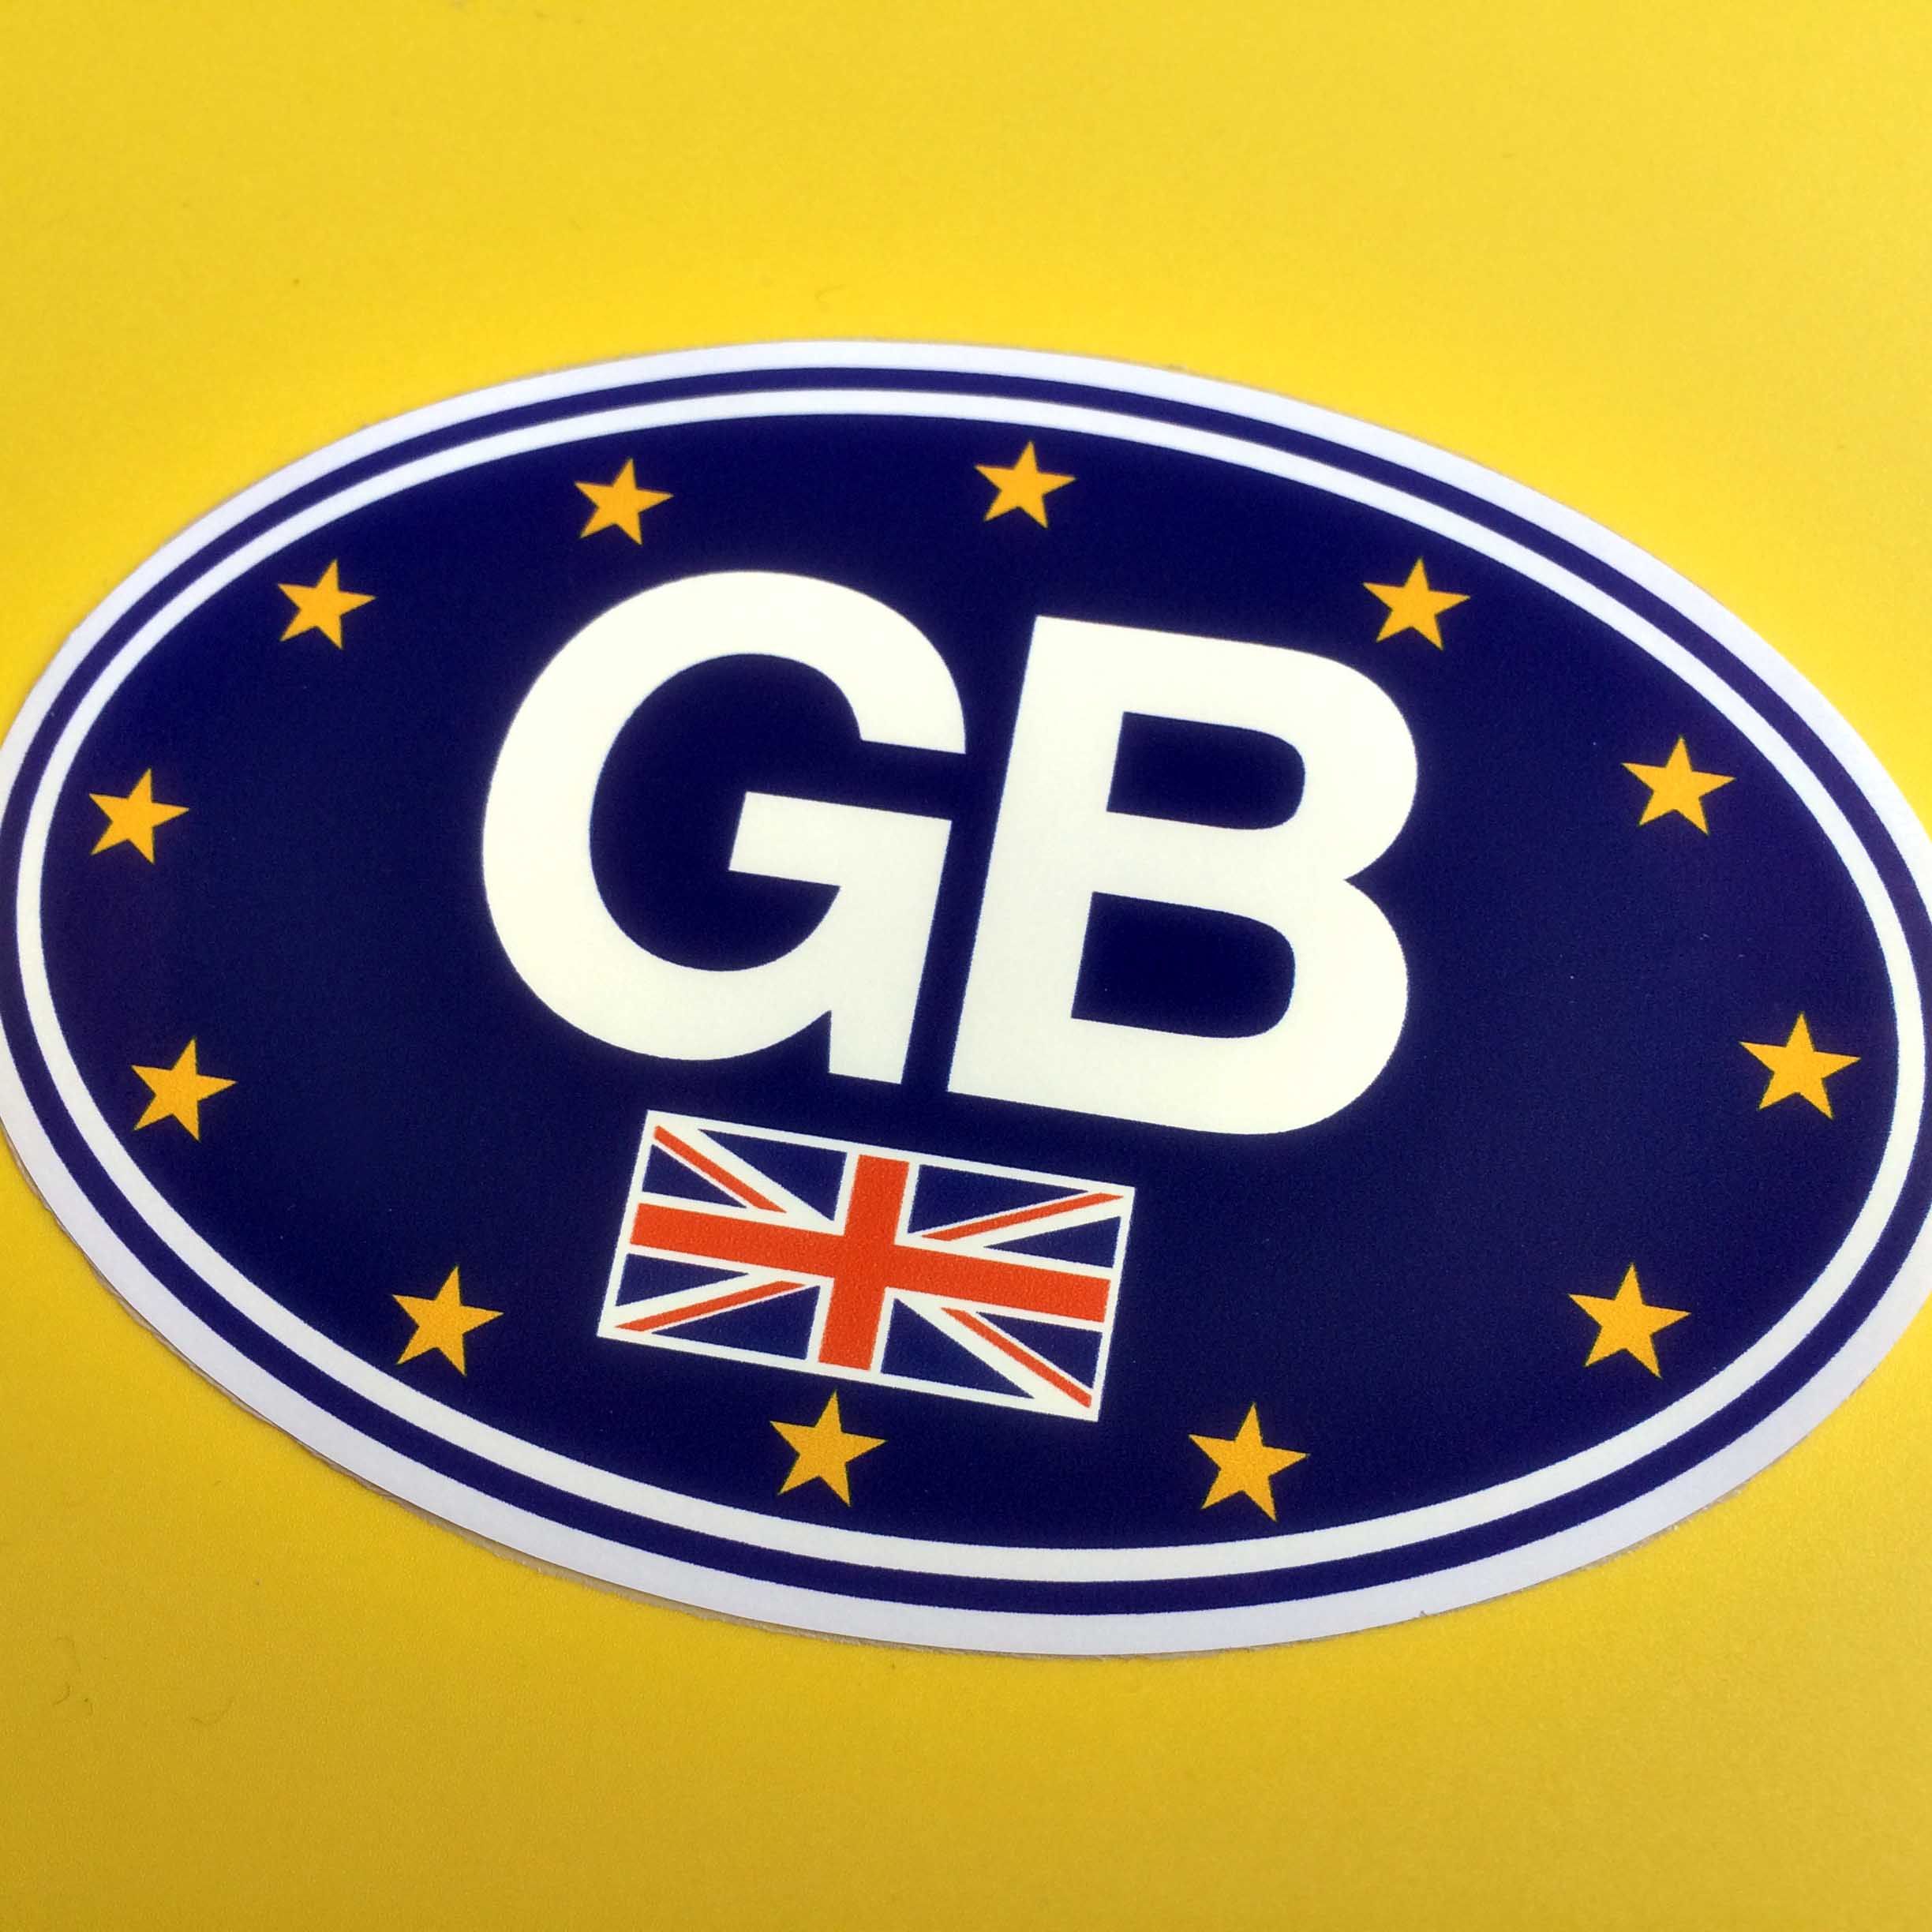 GB UK EURO ENGLAND STICKER. GB in bold white lettering and the Union Jack overlay the European flag on an oval sticker bordered in white.